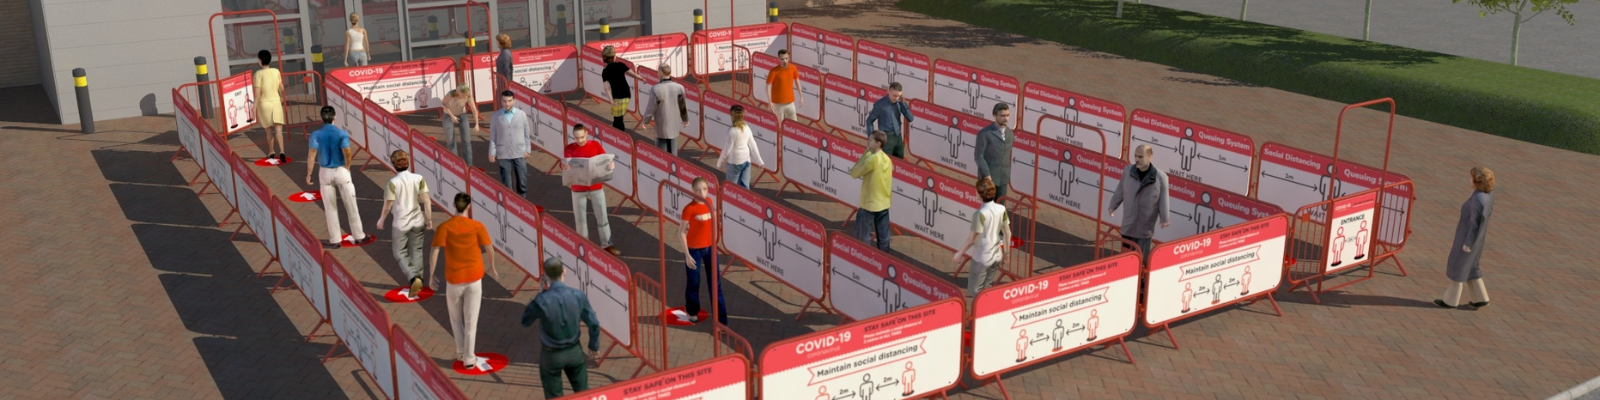 Social distance queuing system using SmartWeld barriers, walkthroughs and covers.